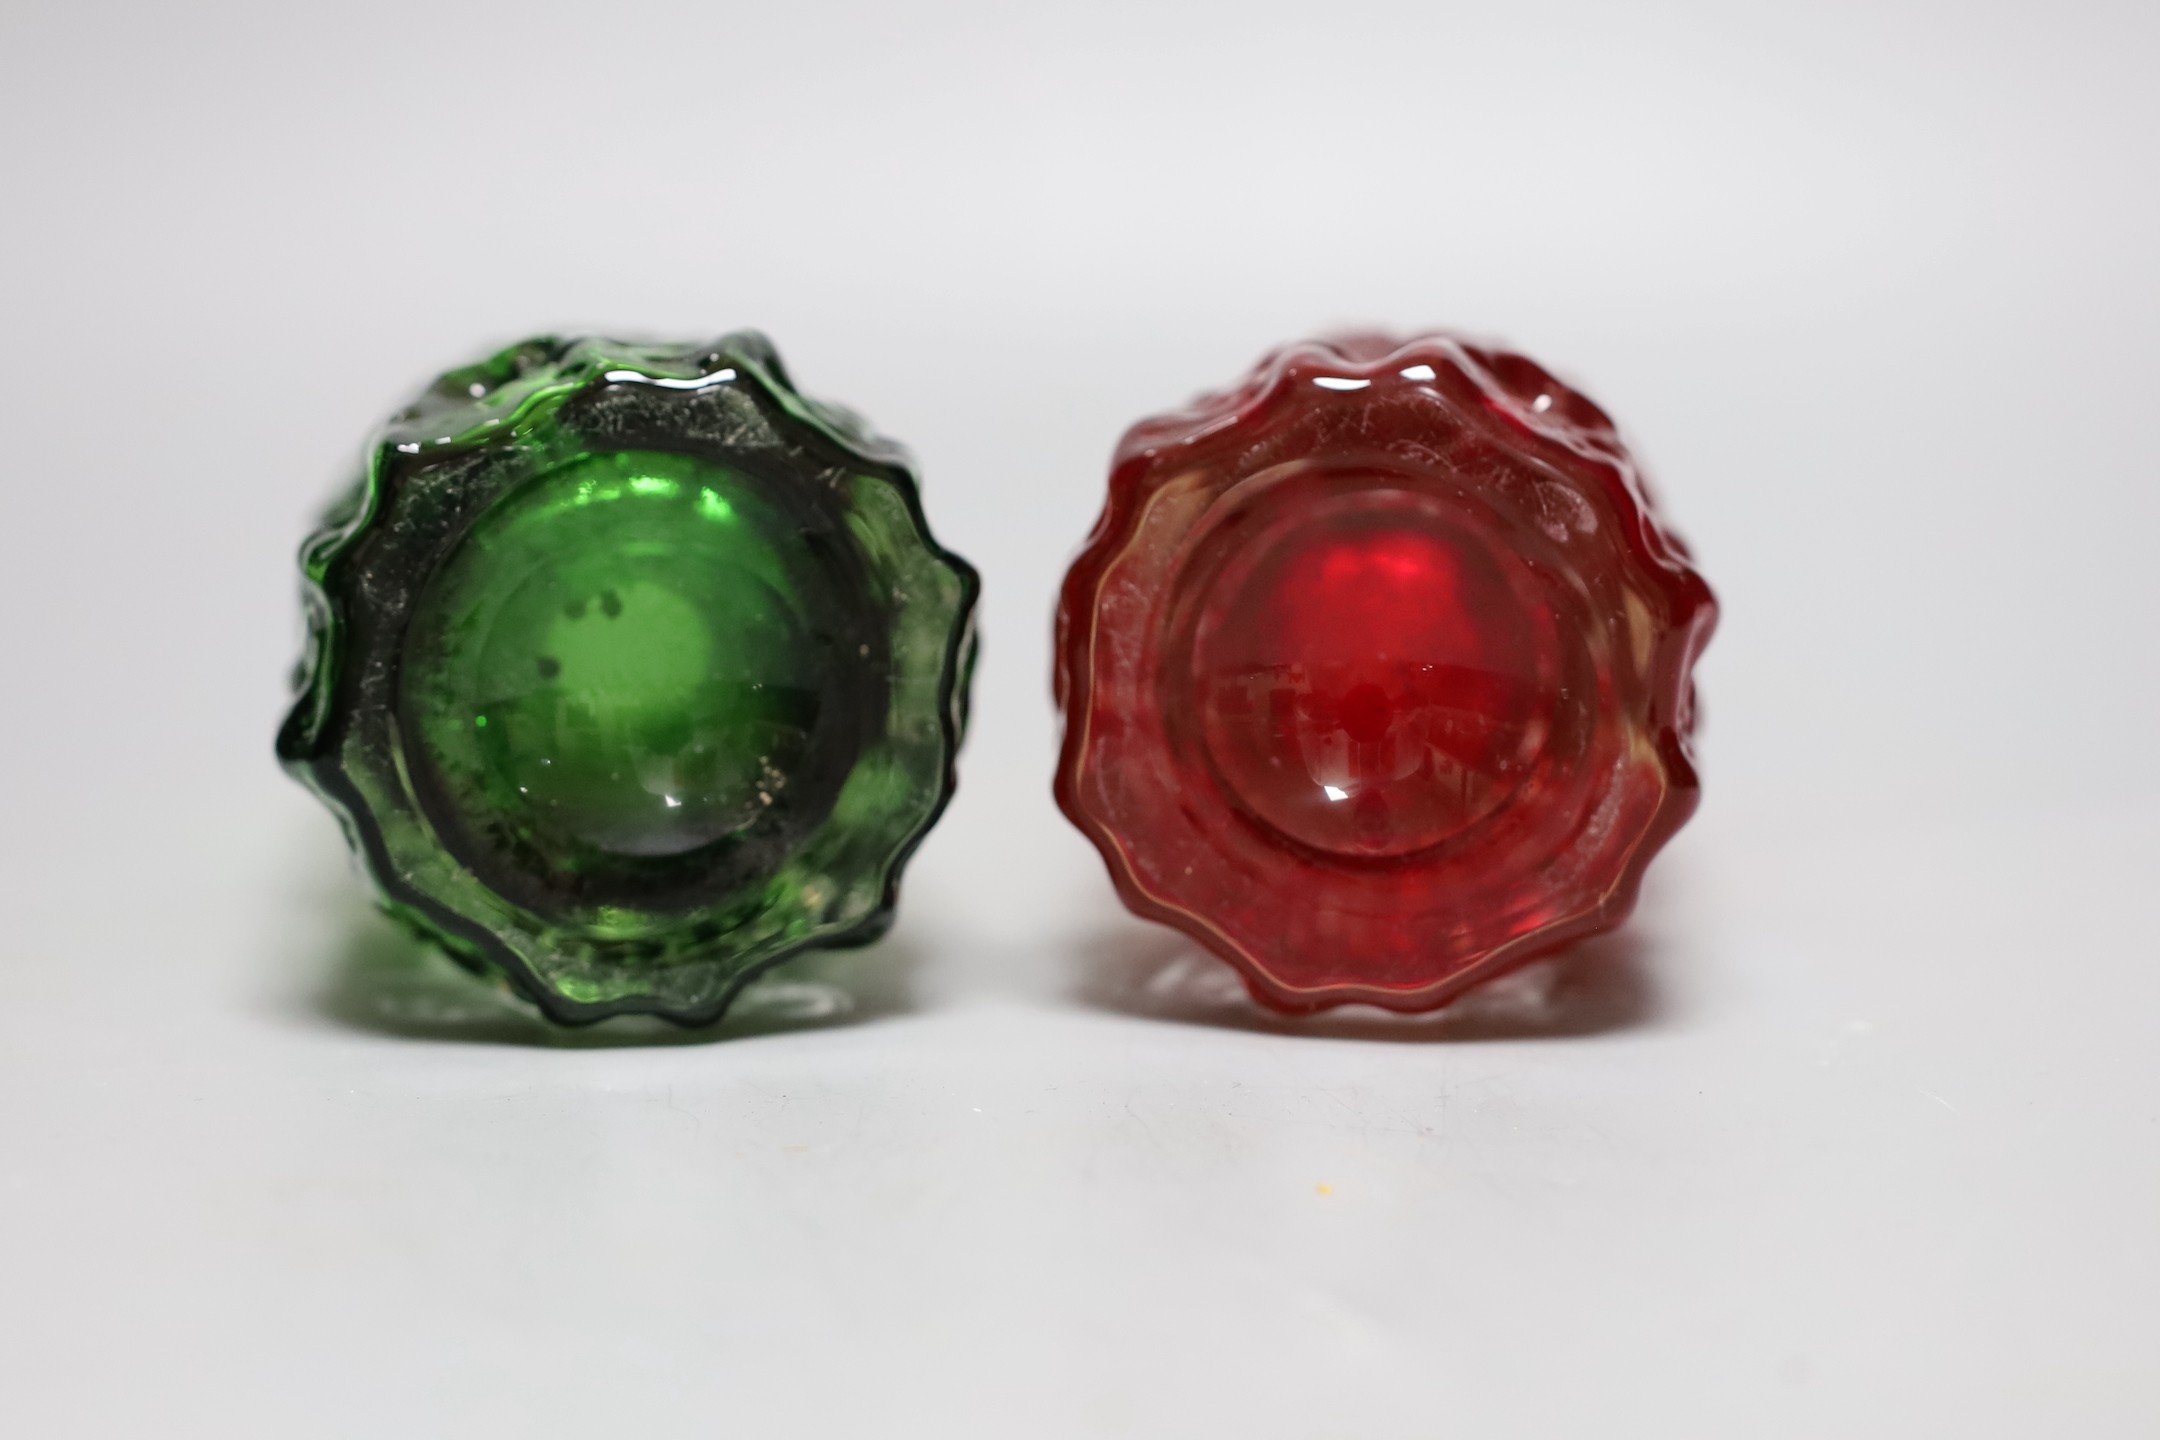 Two Whitefriars 'bark' cylinder vases, model 9689, designed by Geoffrey Baxter, in red and green glass, each 19cm high.